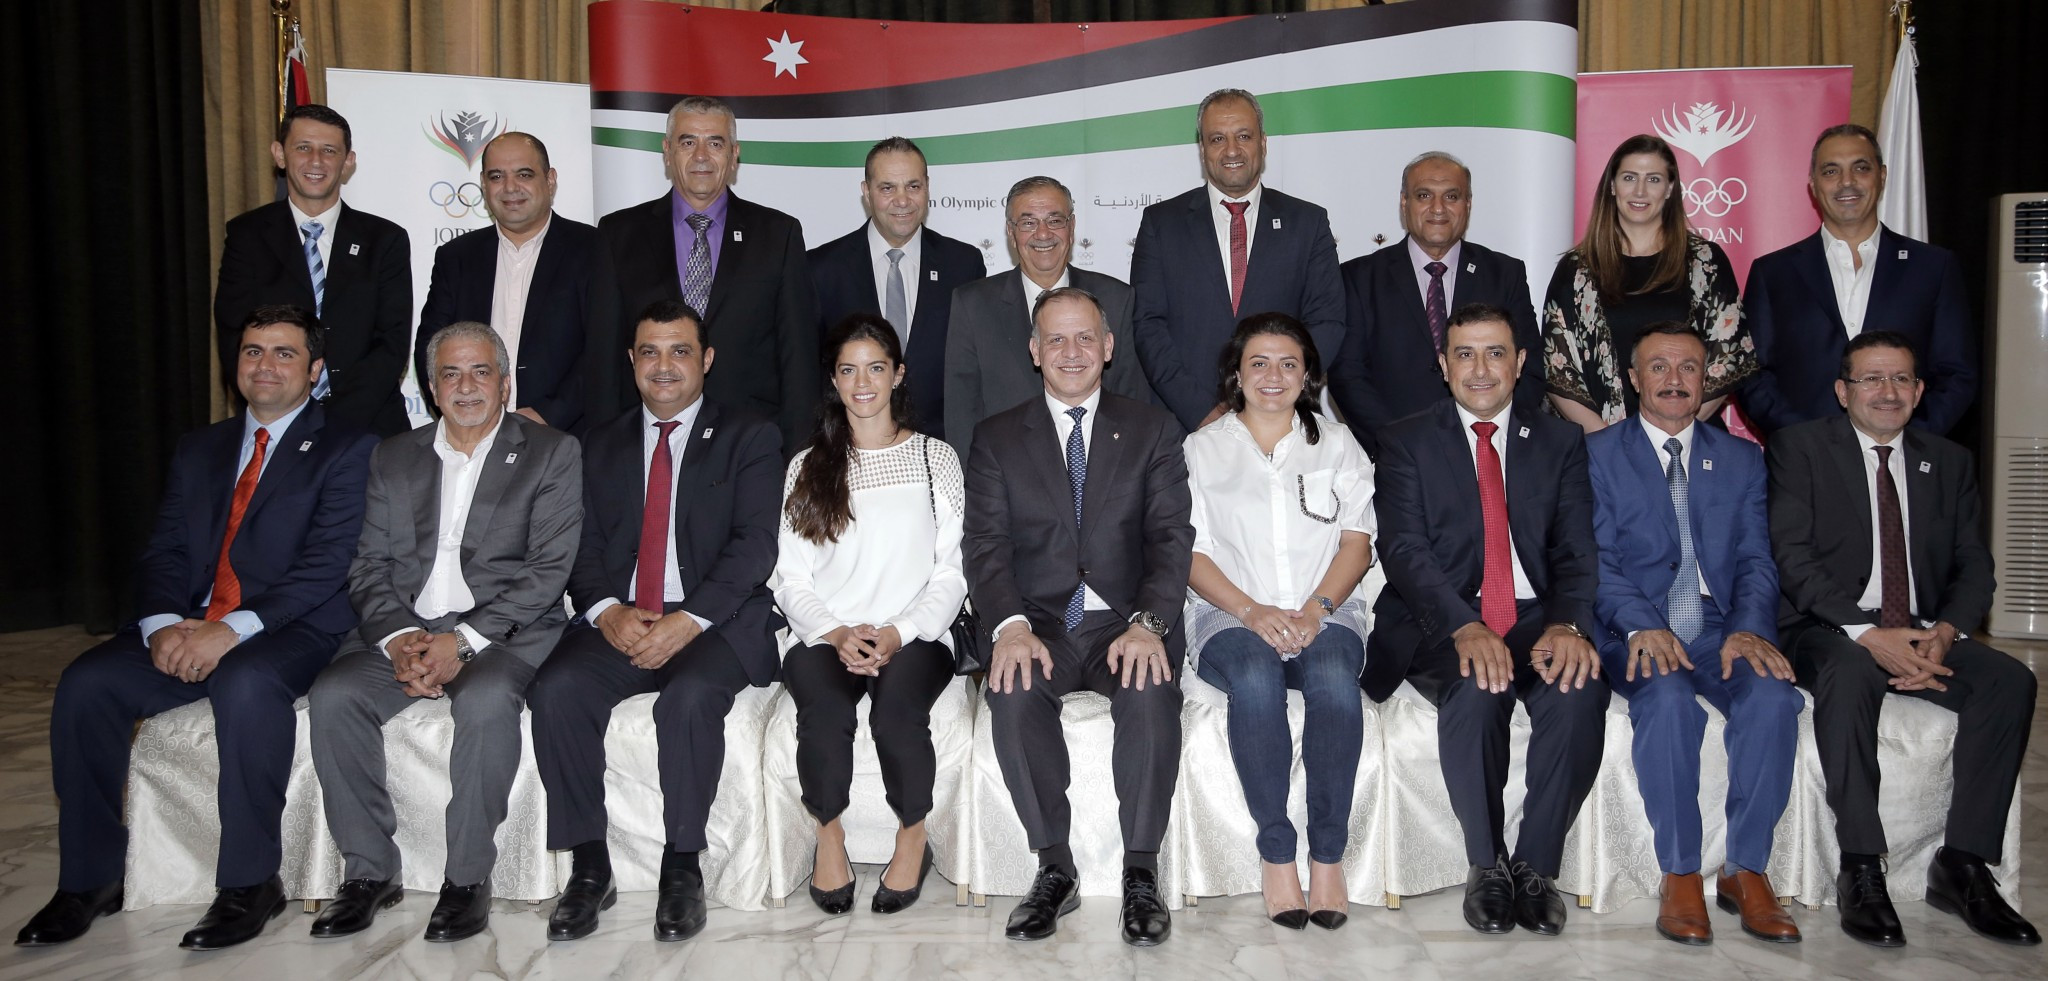 Prince Feisal Al Hussein has been re-elected as President of the Jordan Olympic Committee, along with a new Board ©JOC